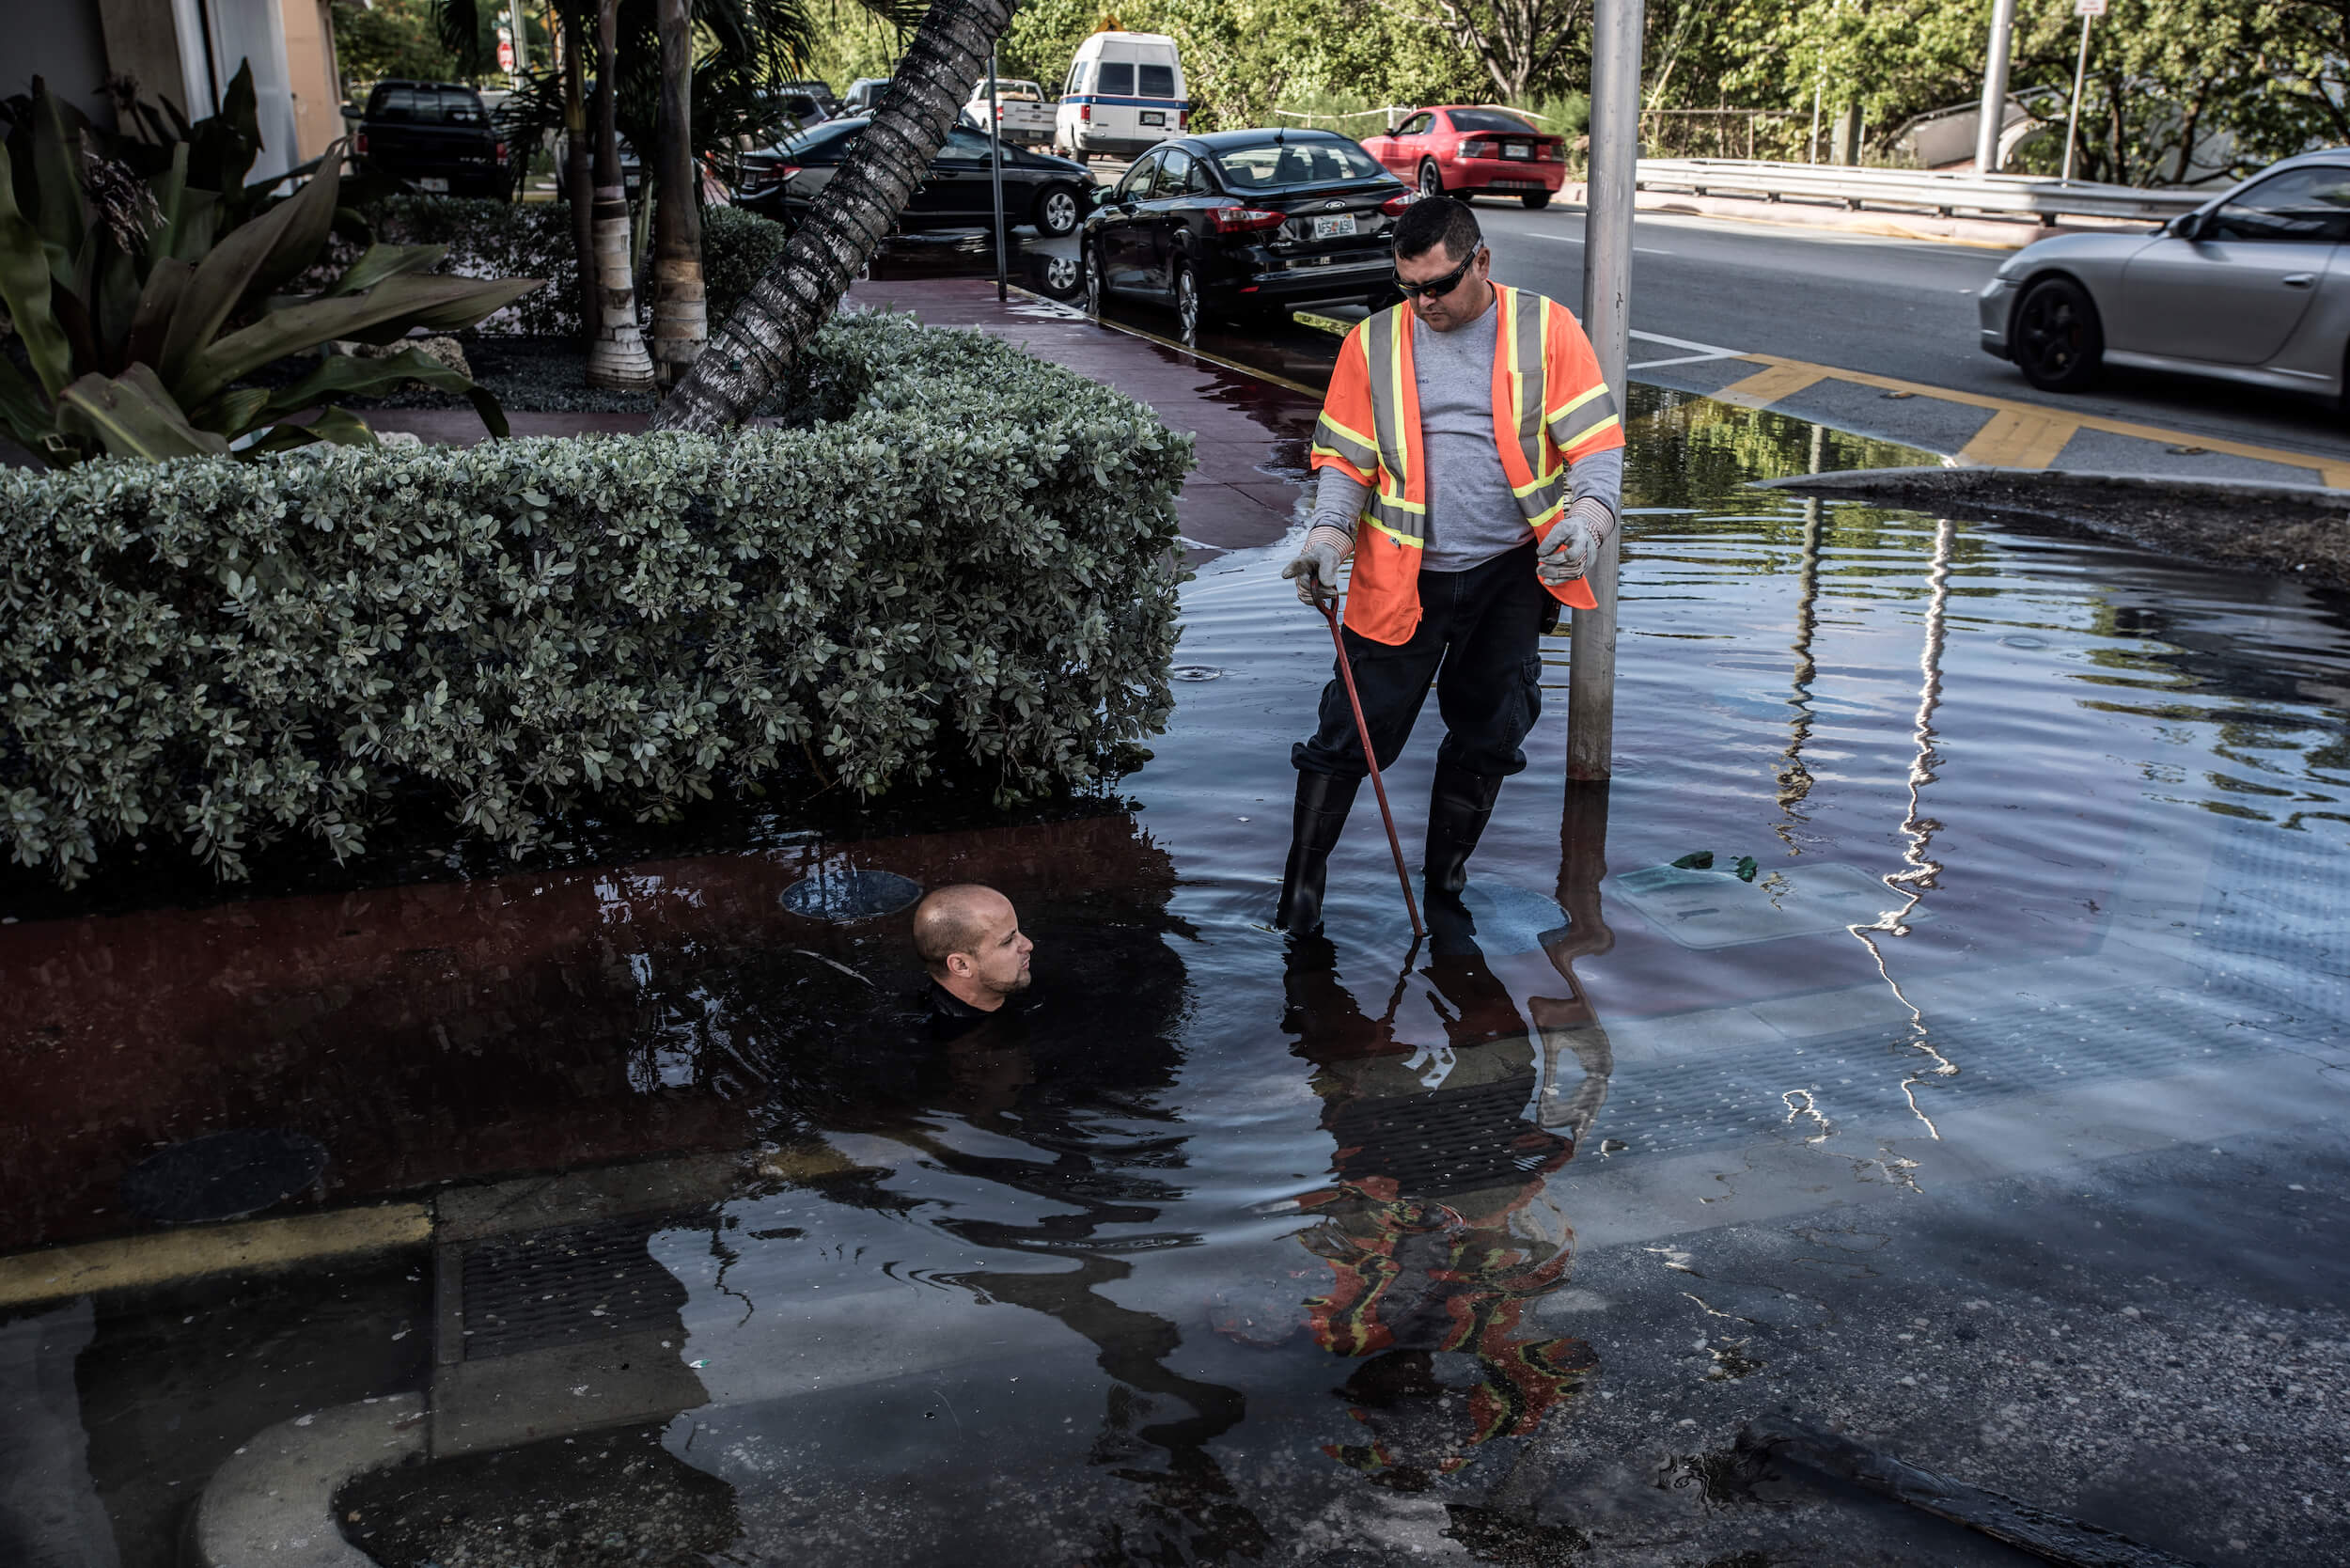 Image of rising waters through drainage system in Miami as a man crouches in drain